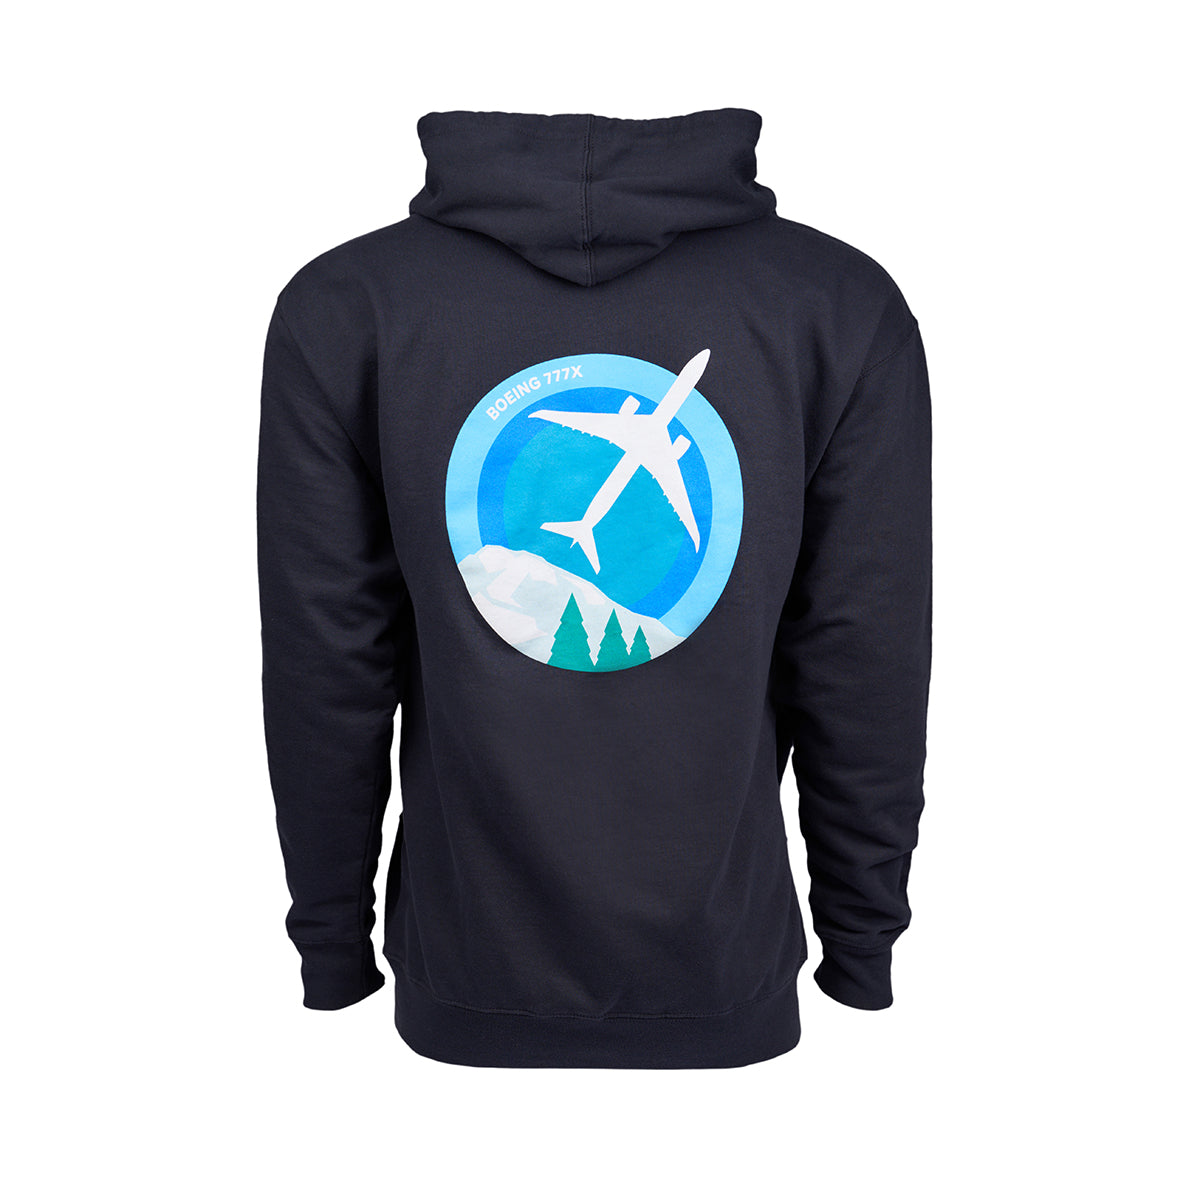 Full product image of the back side of the hooded sweatshirt in a navy blue color.  Showing the Skyward graphic of the Boeing 777X.